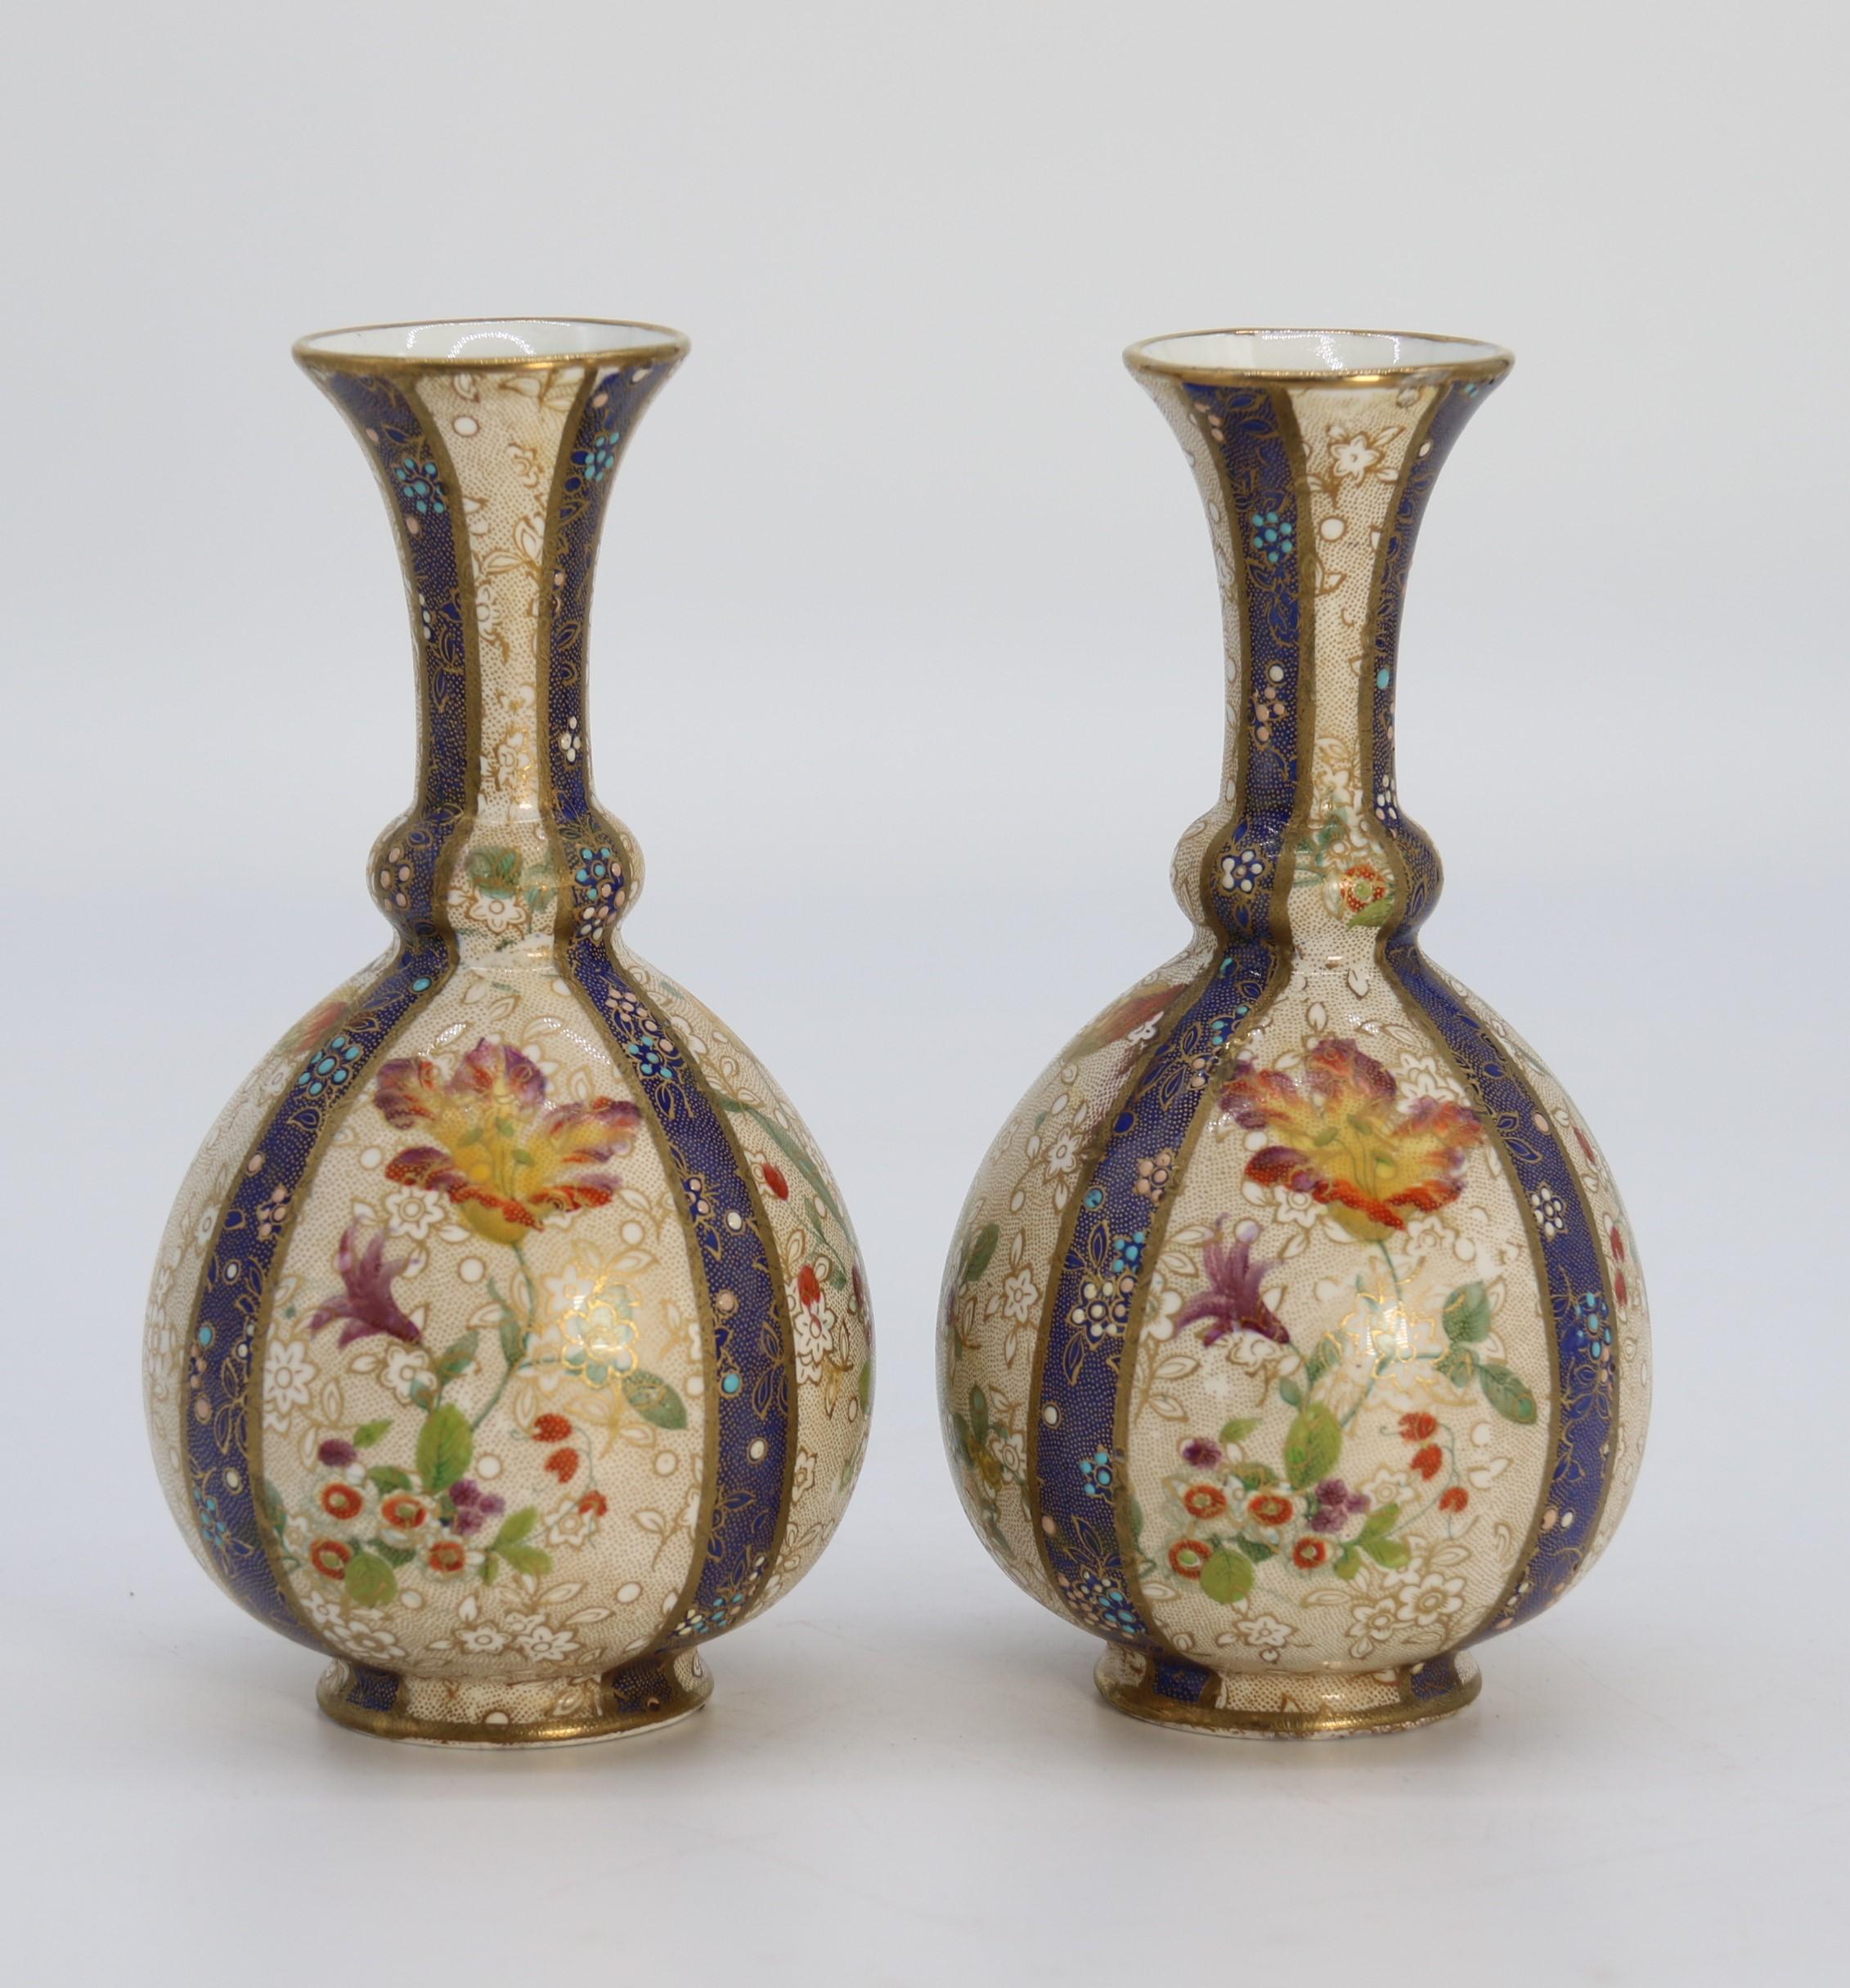 Enameled A pair of English early Carlton Ware enamelled and gilt floral vases, circa 1900